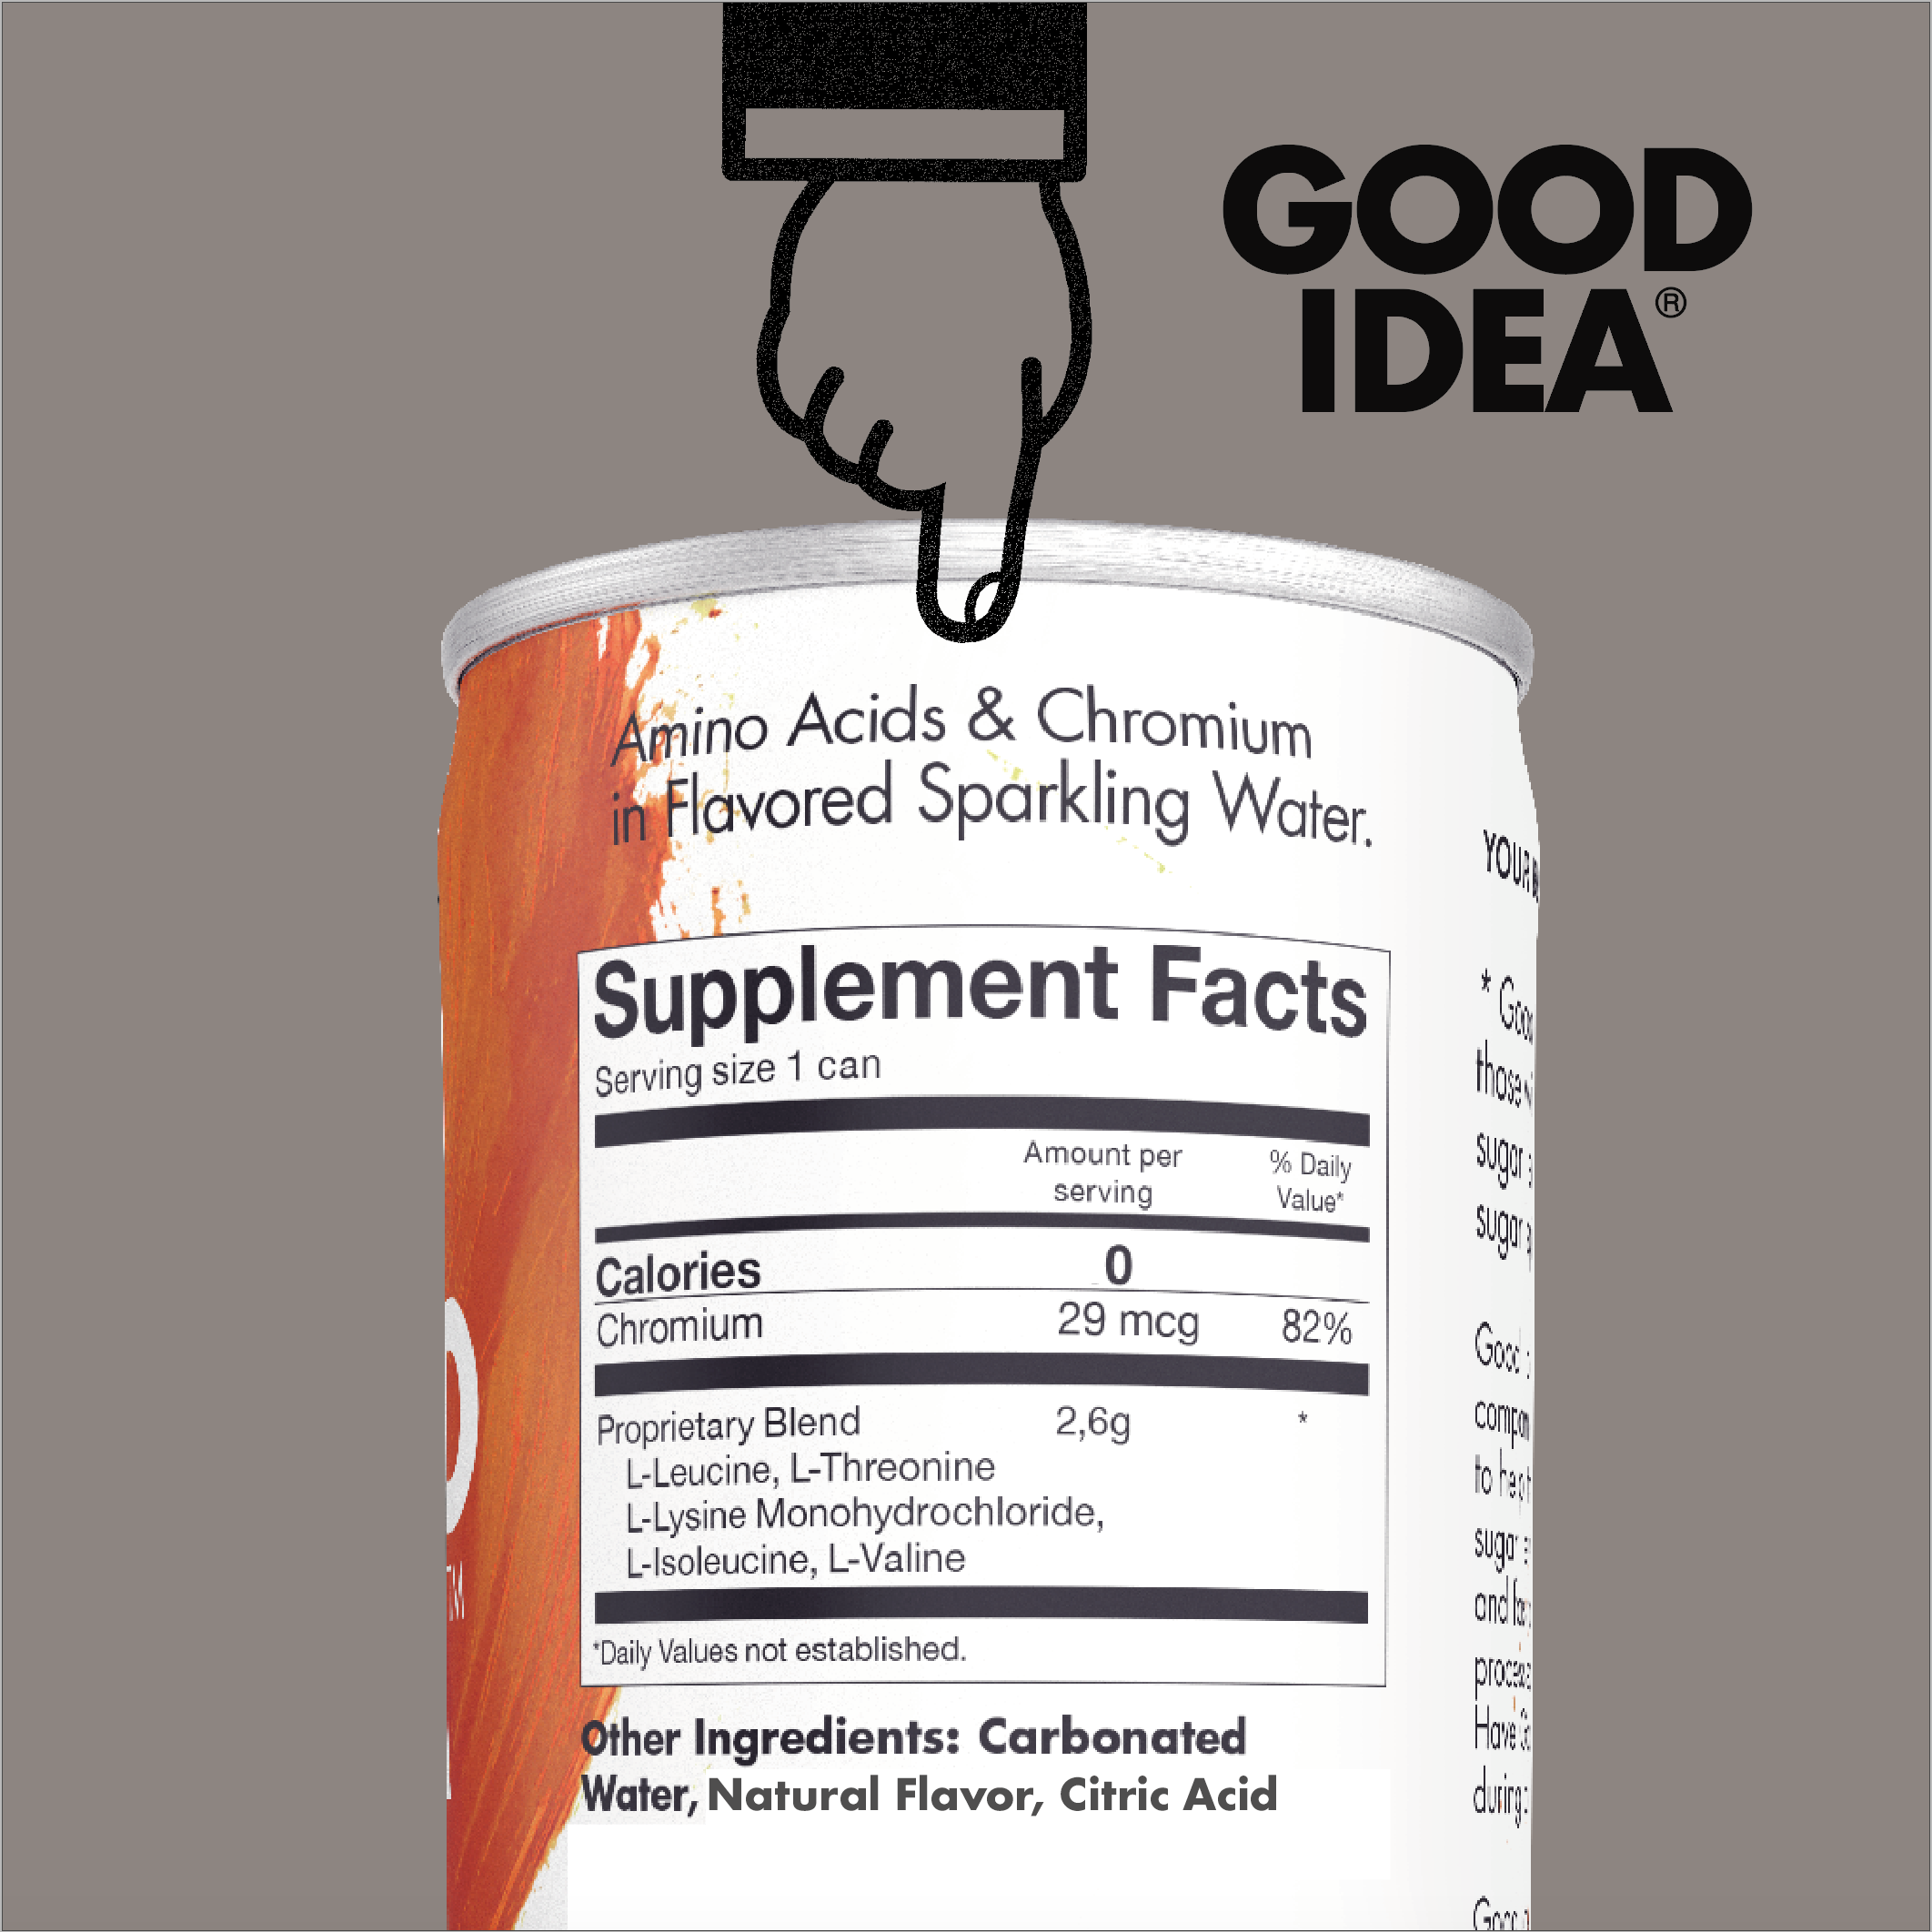 SOLD OUT! Cut your sugar spikes* - Good Idea® 12 Count Sparkling Orange Mango. Now with an Introductory Offer!